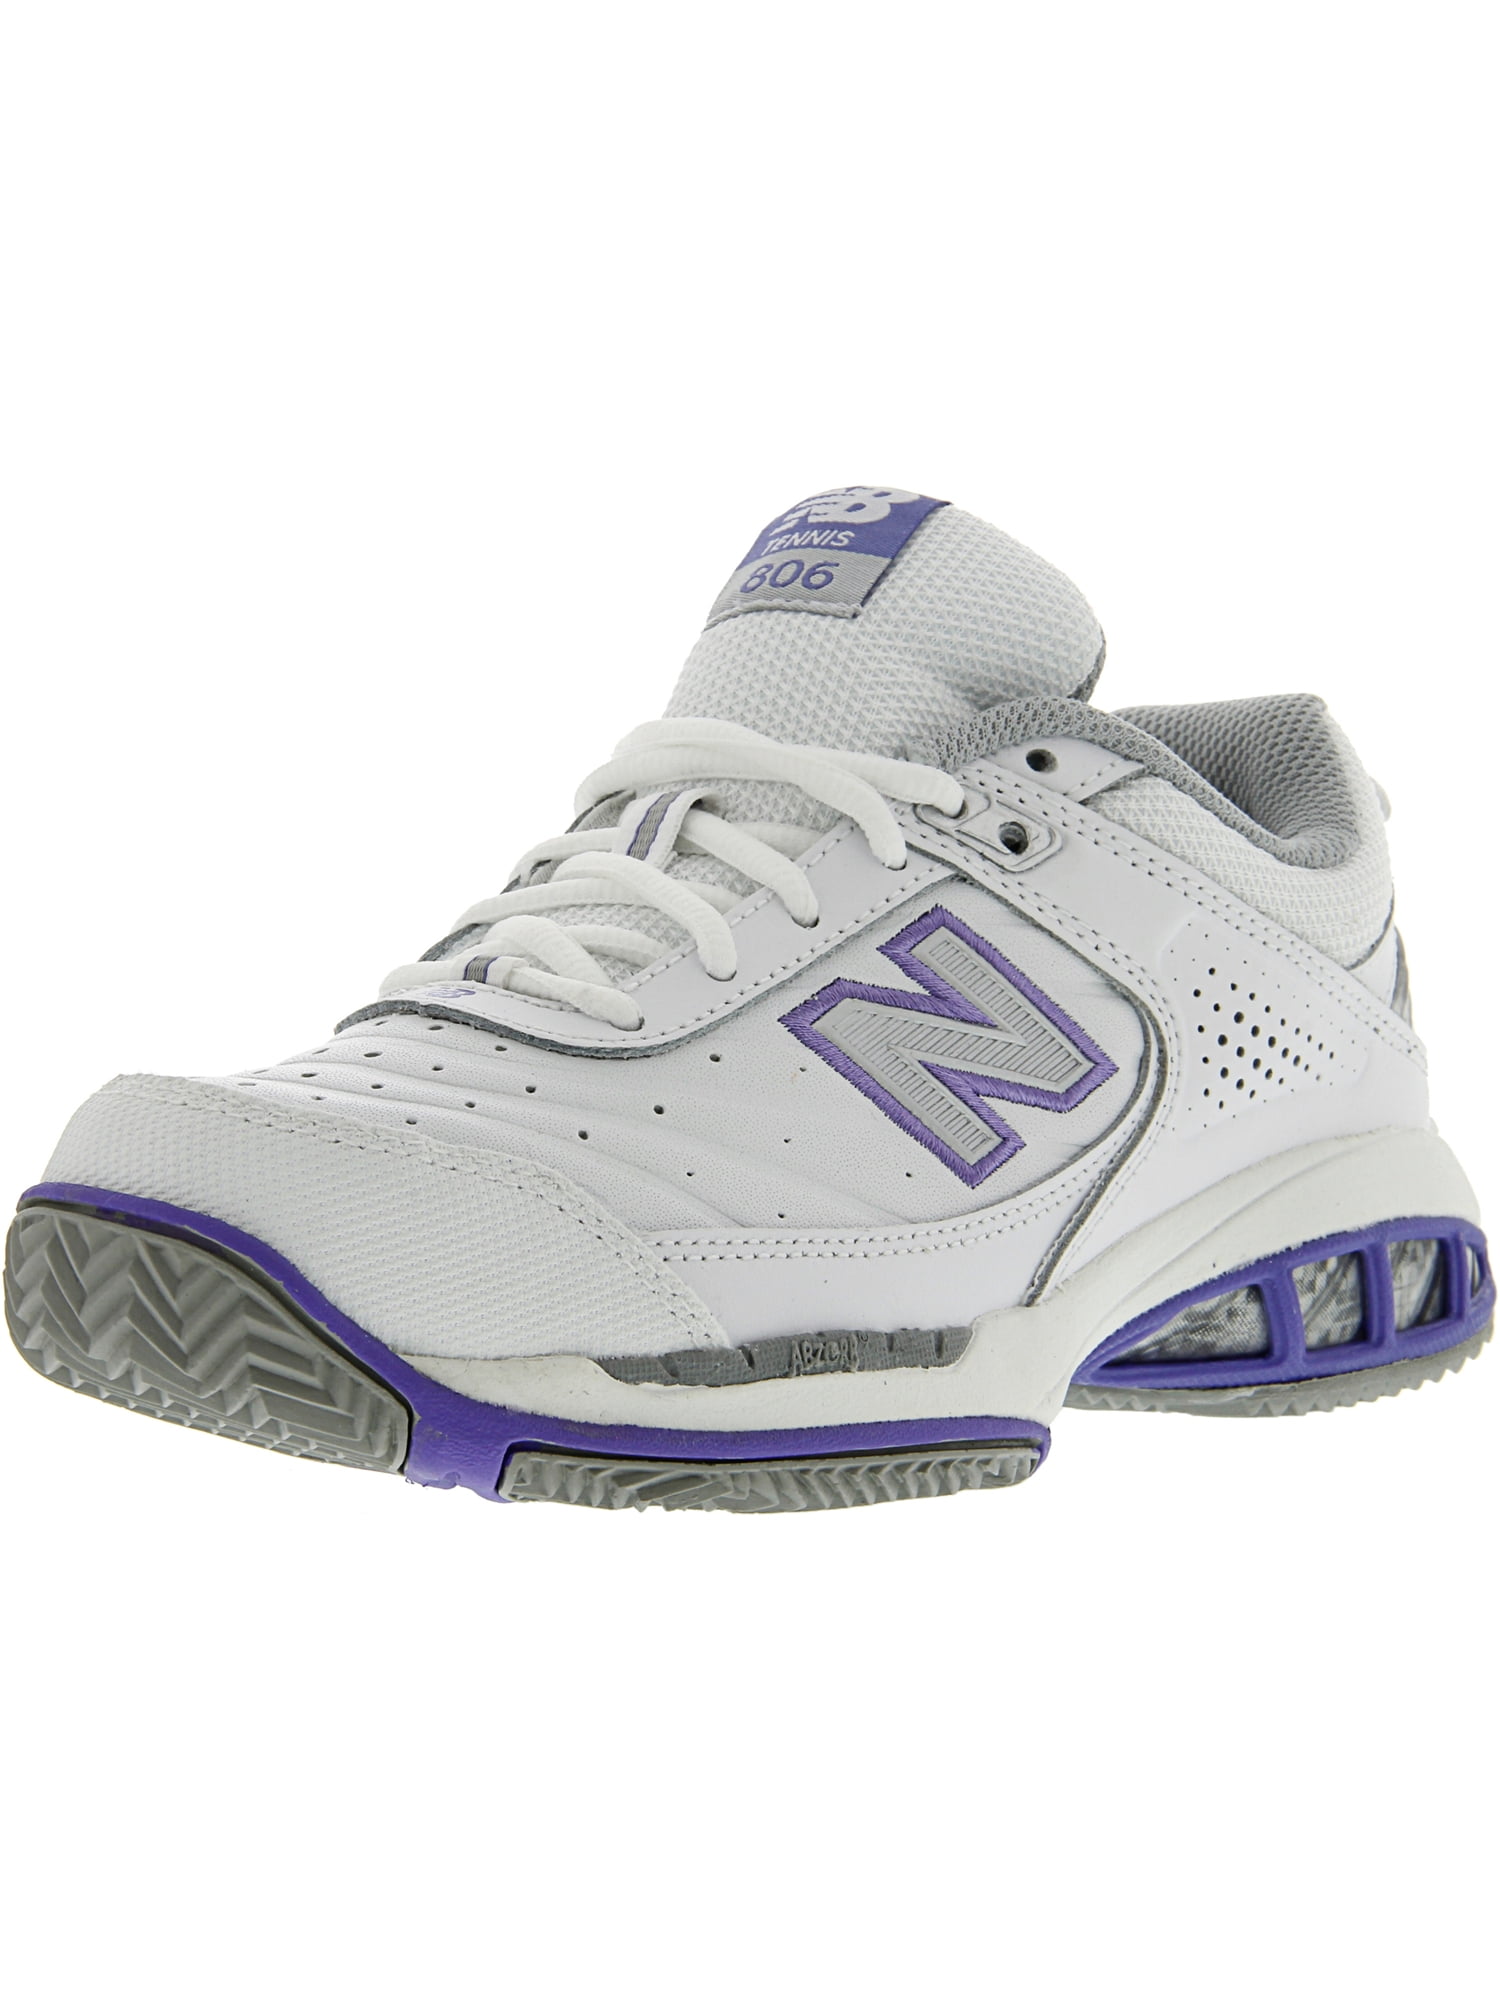 top selling new balance shoes